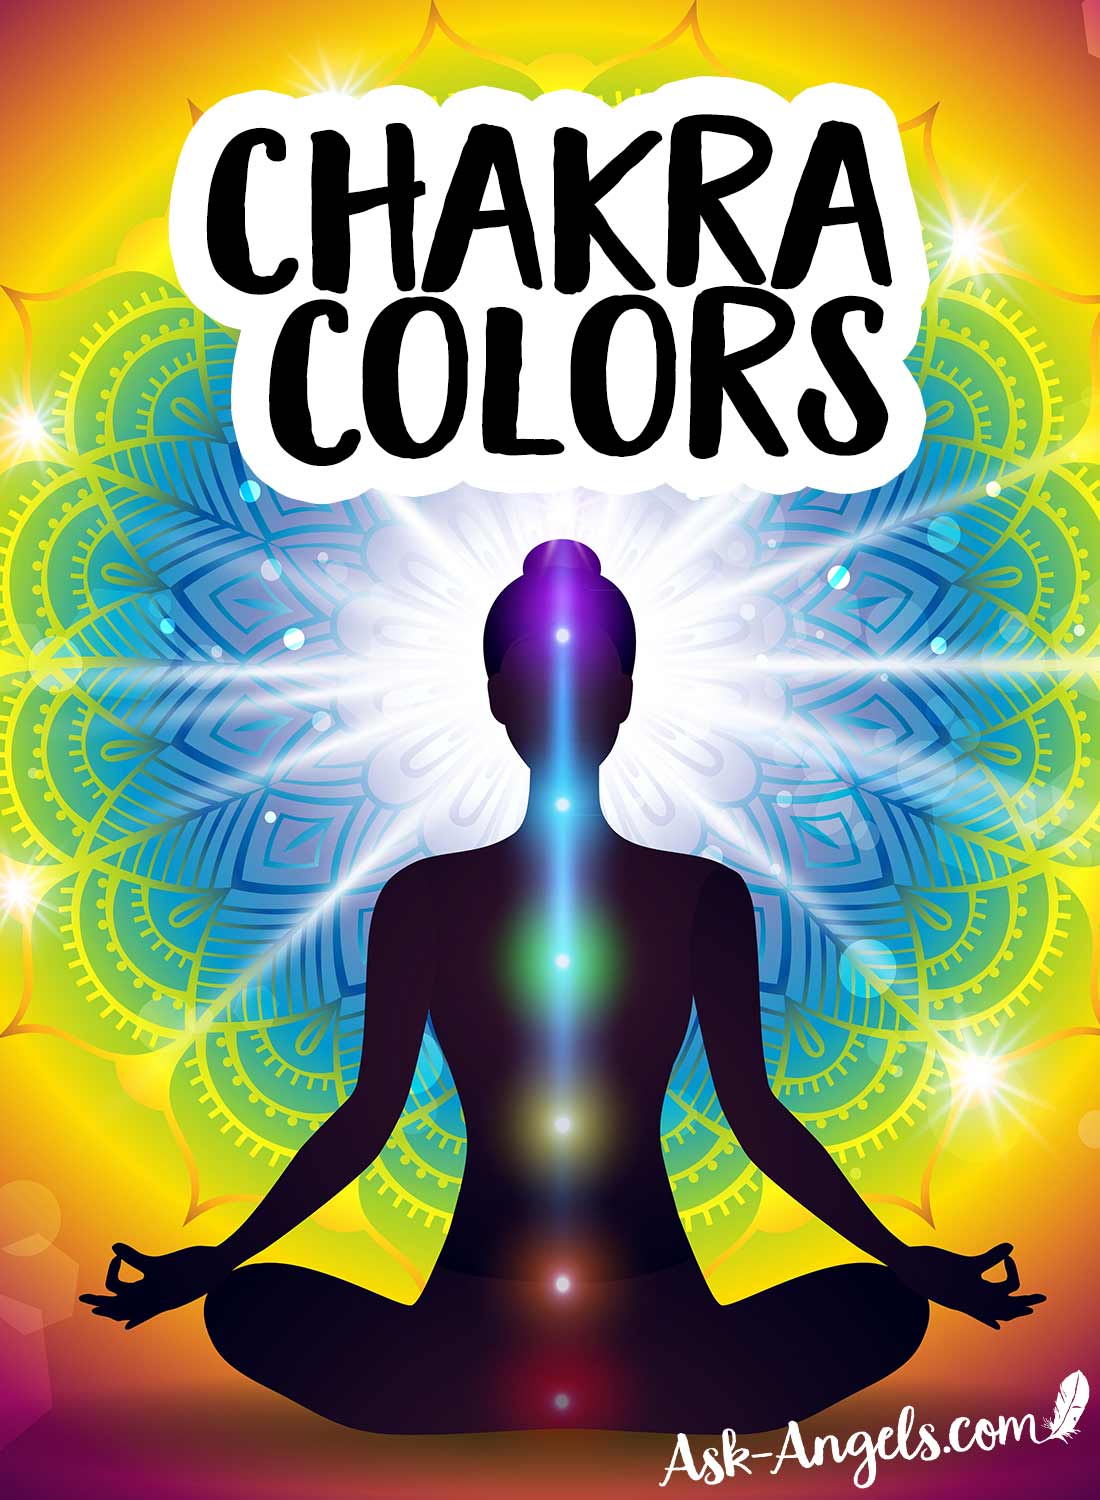 Chakra Colors – Ultimate Guide to The 7 Chakra Colors and Meanings